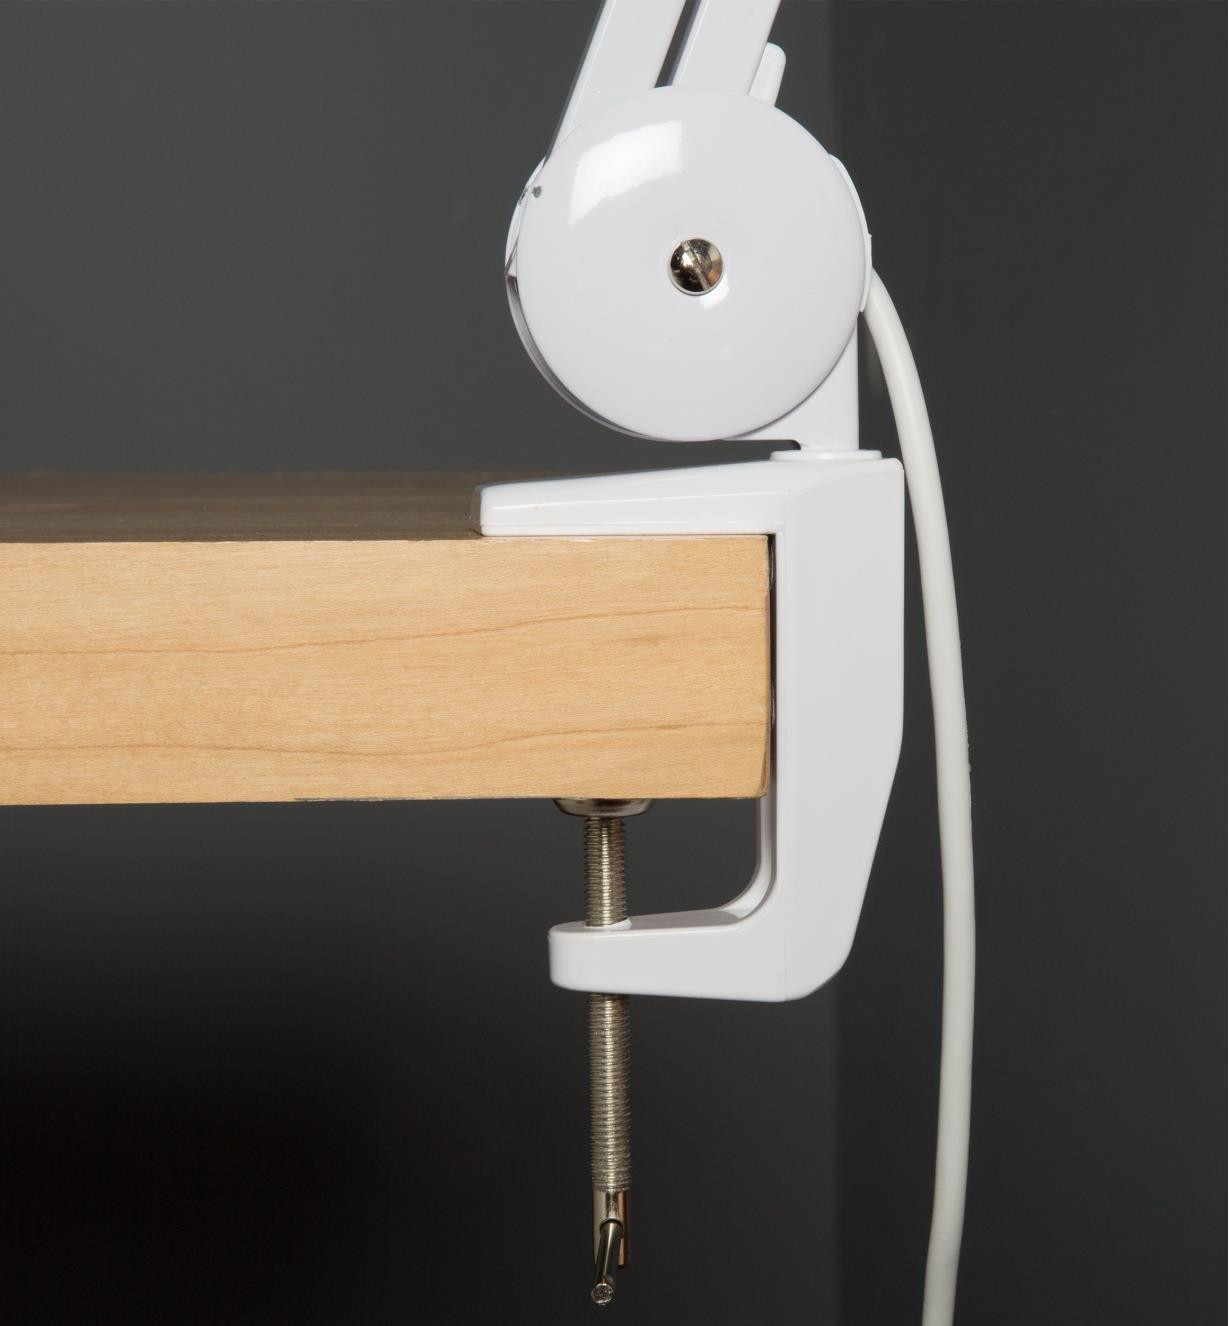 Close-up view of table-mounting clamp